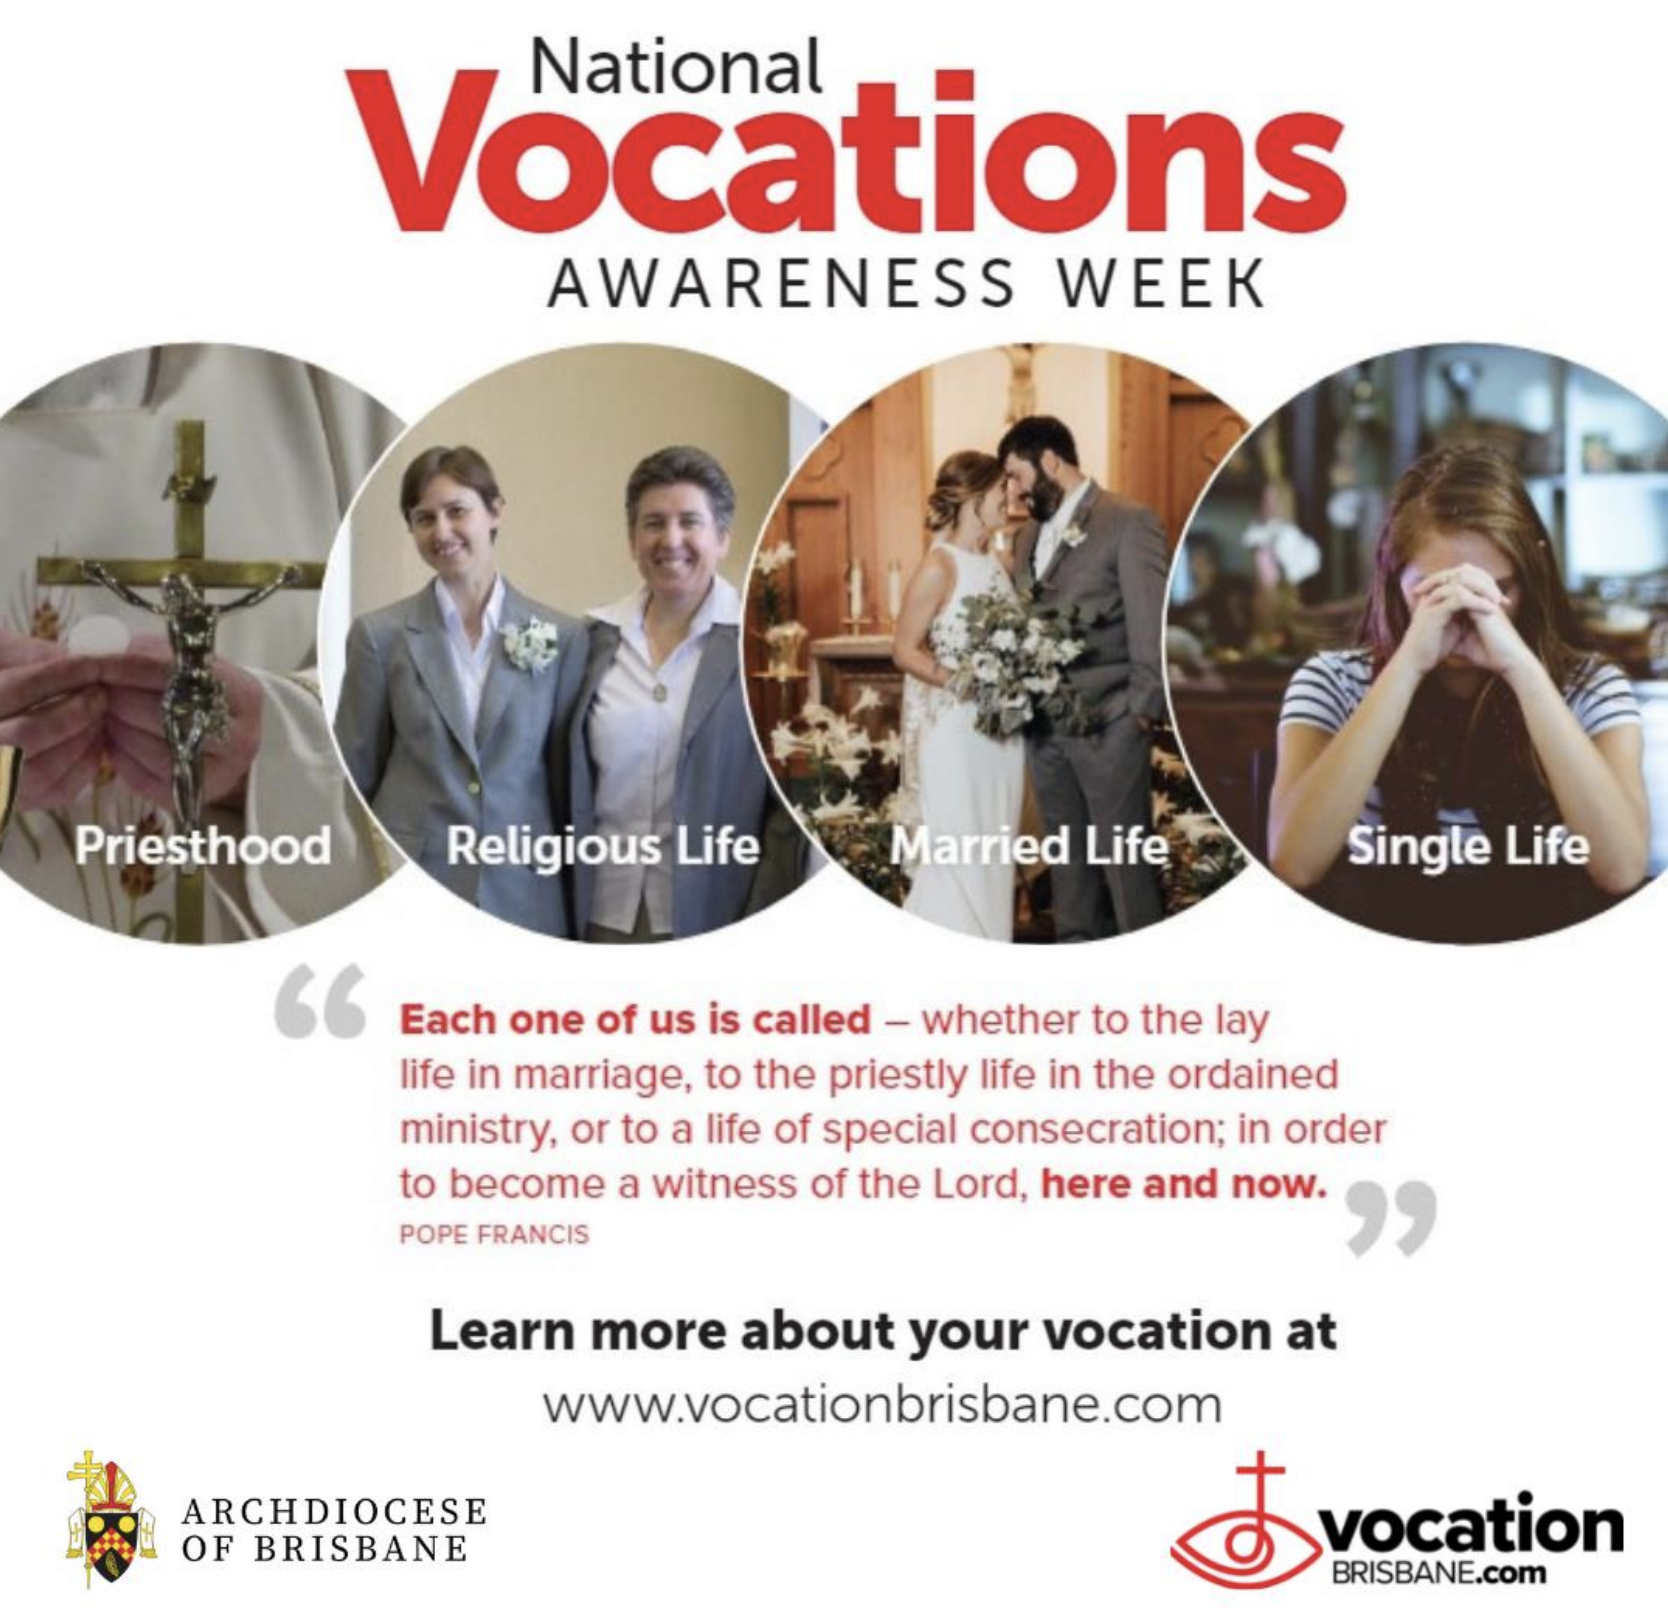 National Vocations Week
6-13 August 2023